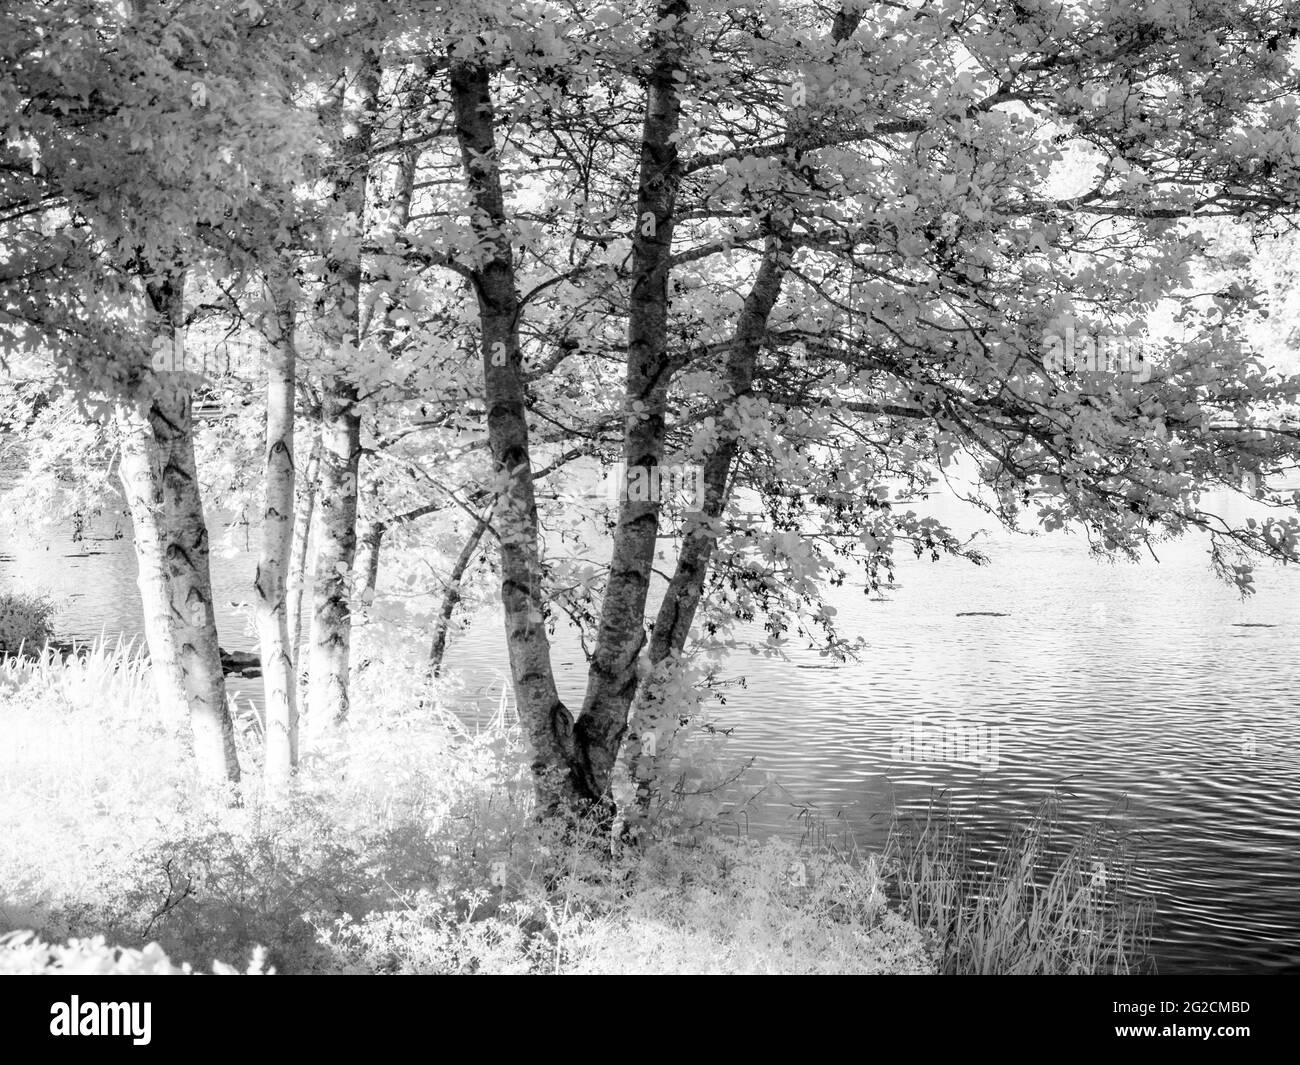 A sunny summer evening at a small lake in Swindon, Wiltshire taken in infrared. Stock Photo